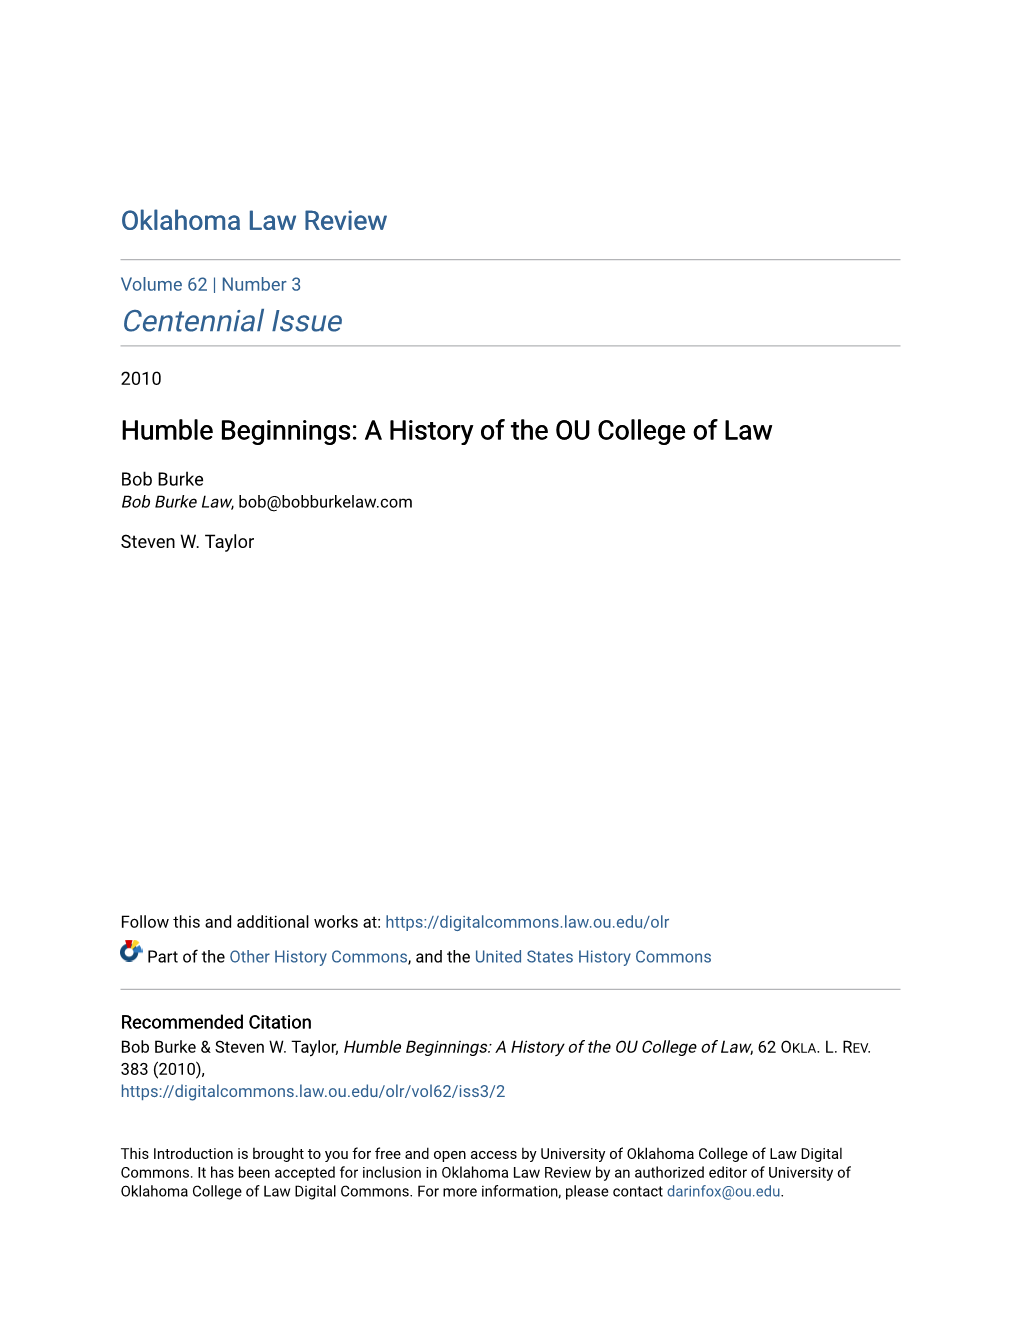 Humble Beginnings: a History of the OU College of Law